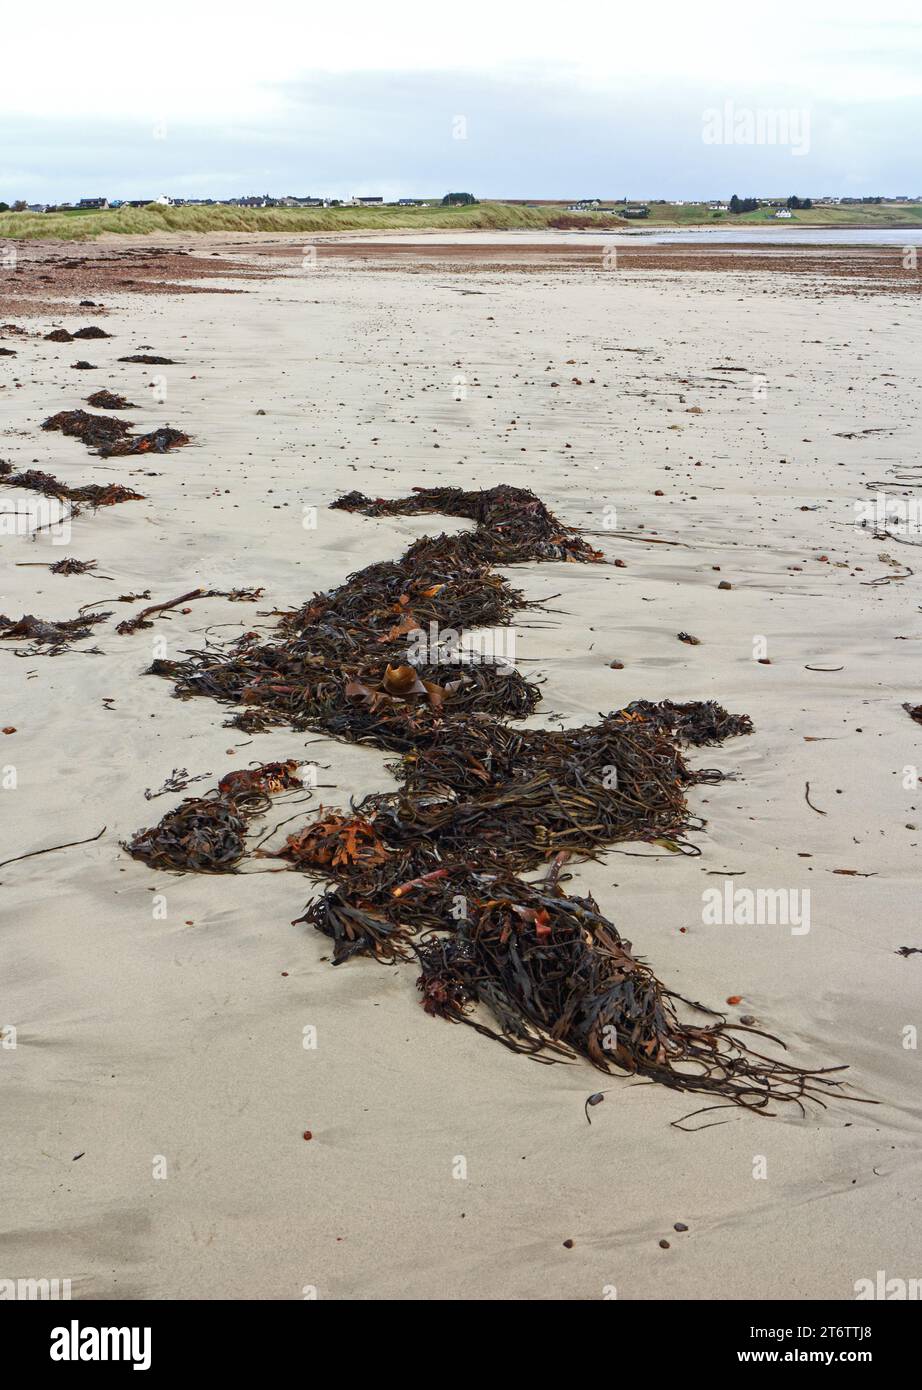 A large strand of seaweed washed-up on the shoreline at Traigh Chuil on the east coast of the Isle of Lewis, Outer Hebrides, Scotland. Stock Photo